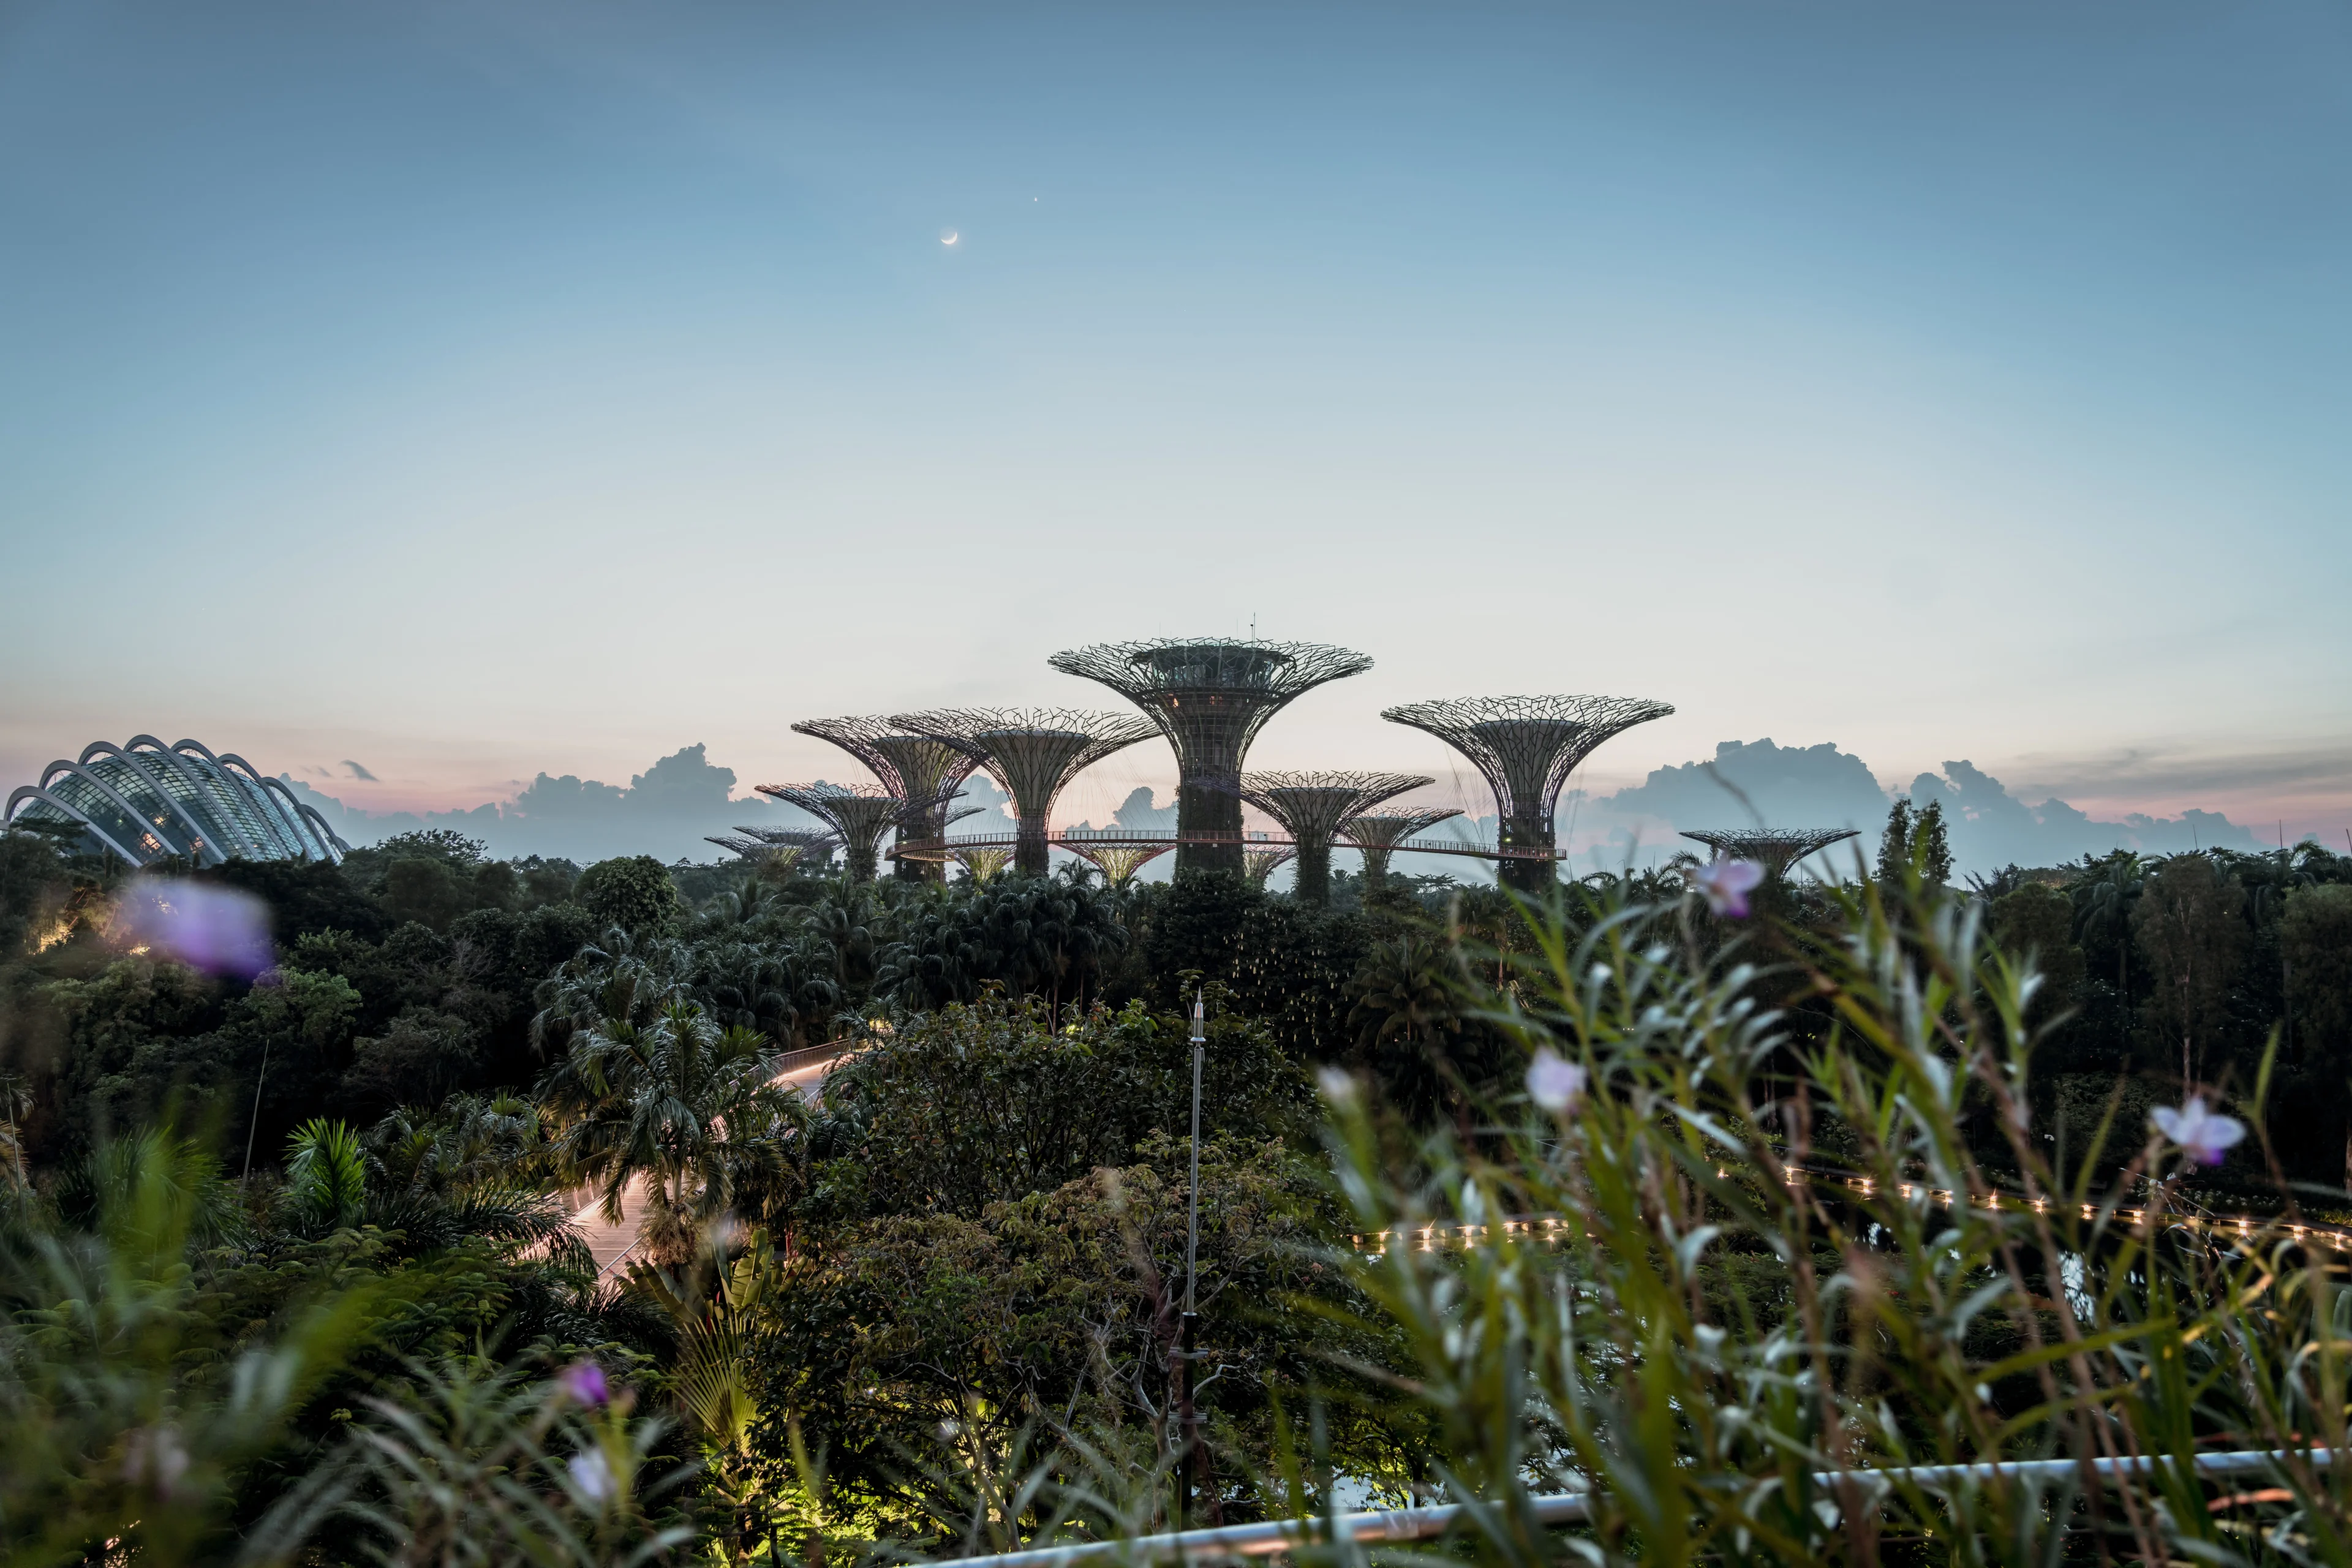 Visitors Guide to Gardens by the Bay in Singapore